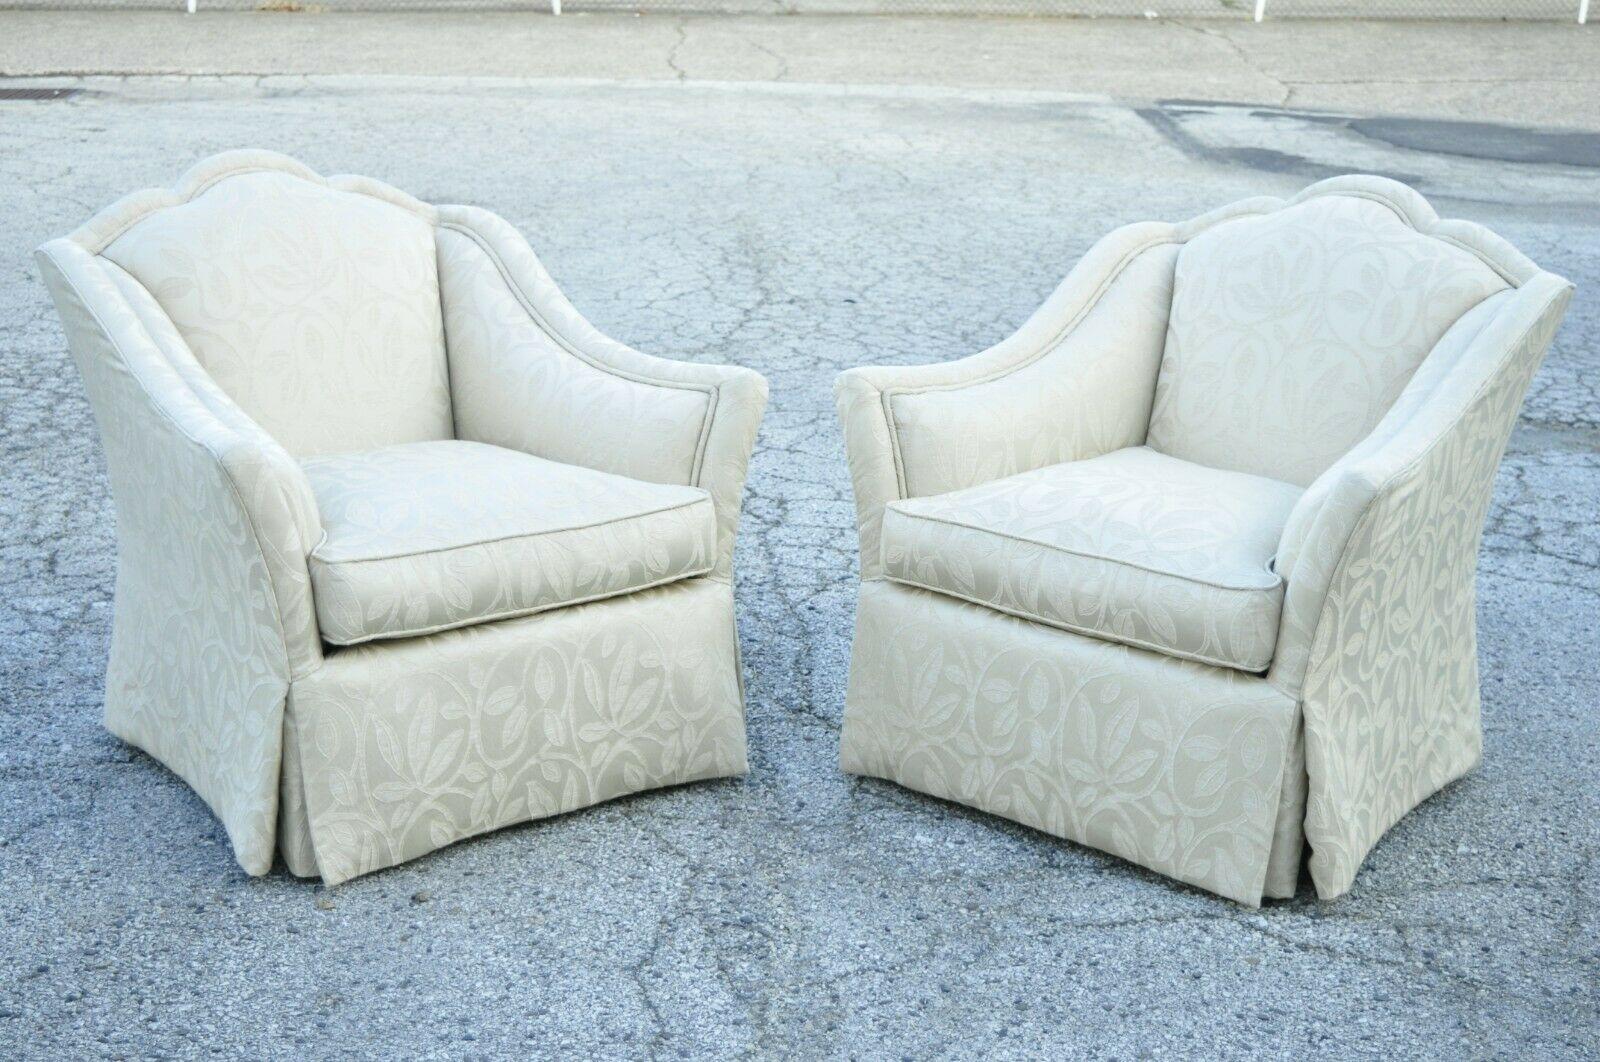 Century Furniture Beige 11-909 living room reading club lounge chairs - a pair. Item features shapely swooping arm, hump back, skirted frame, beige upholstery with floral print, quality American craftsmanship, great style and form. Circa 21st